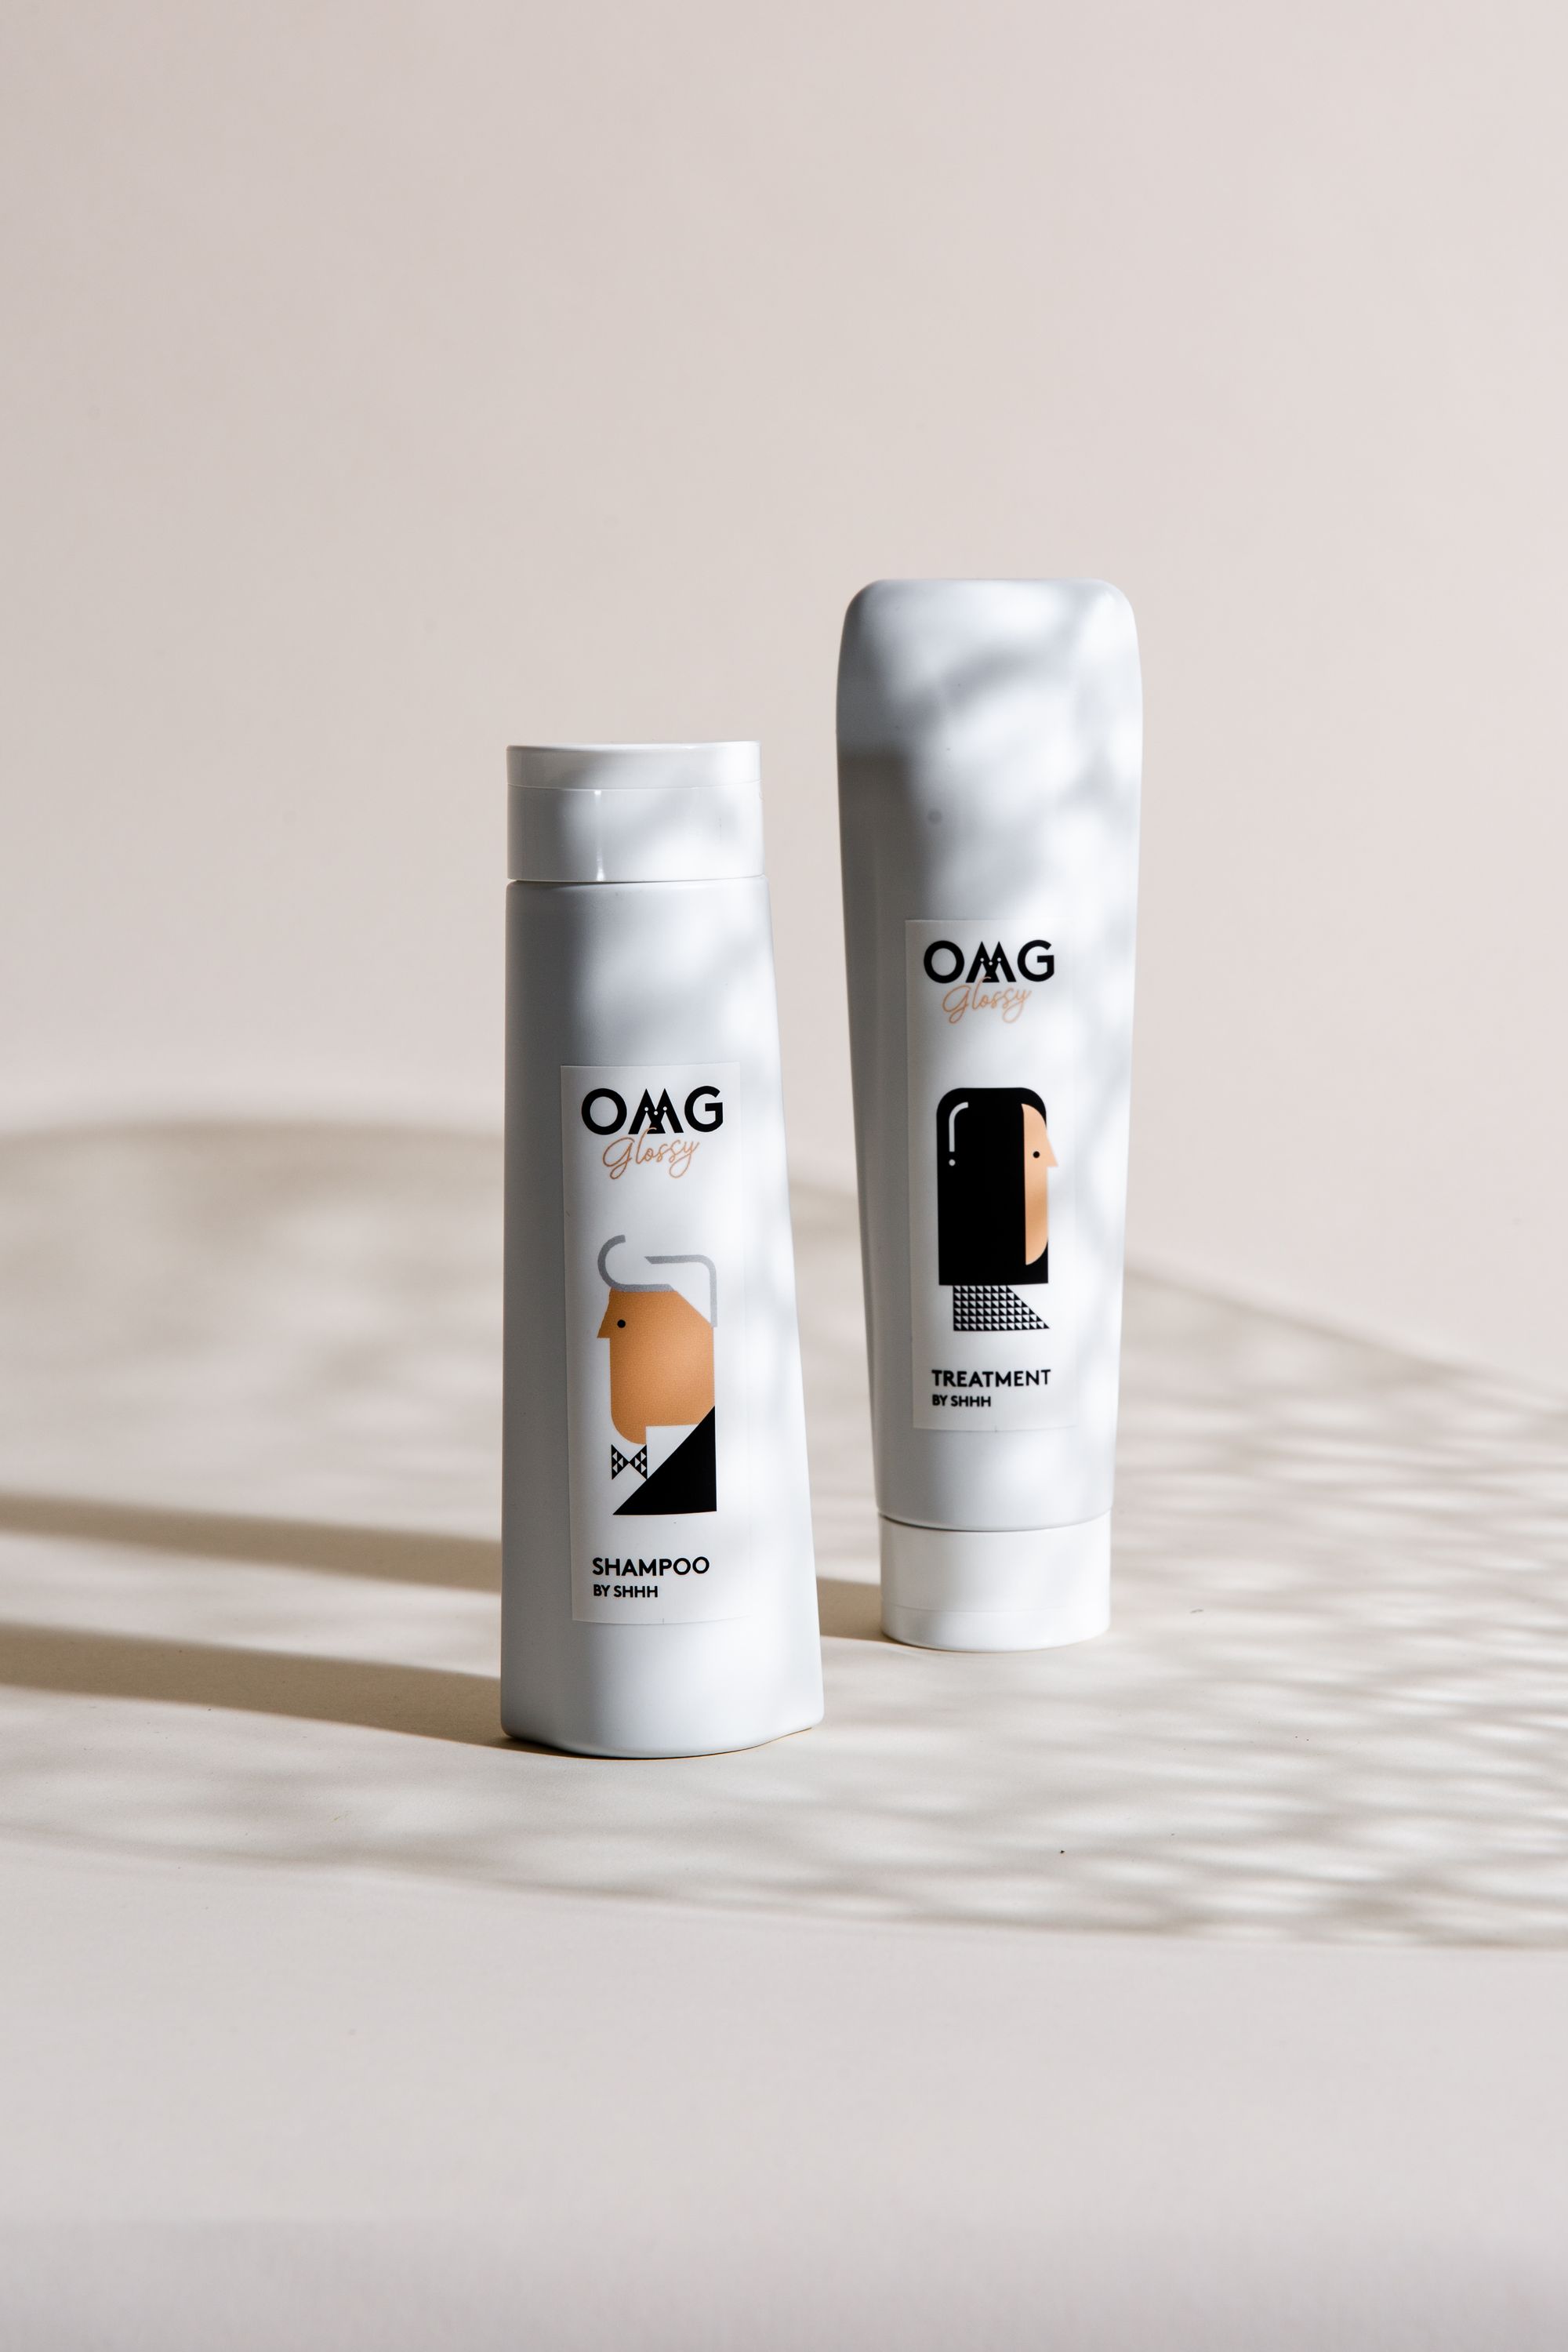 Your Hair is Your Crown - OMG Haircare by SHHH